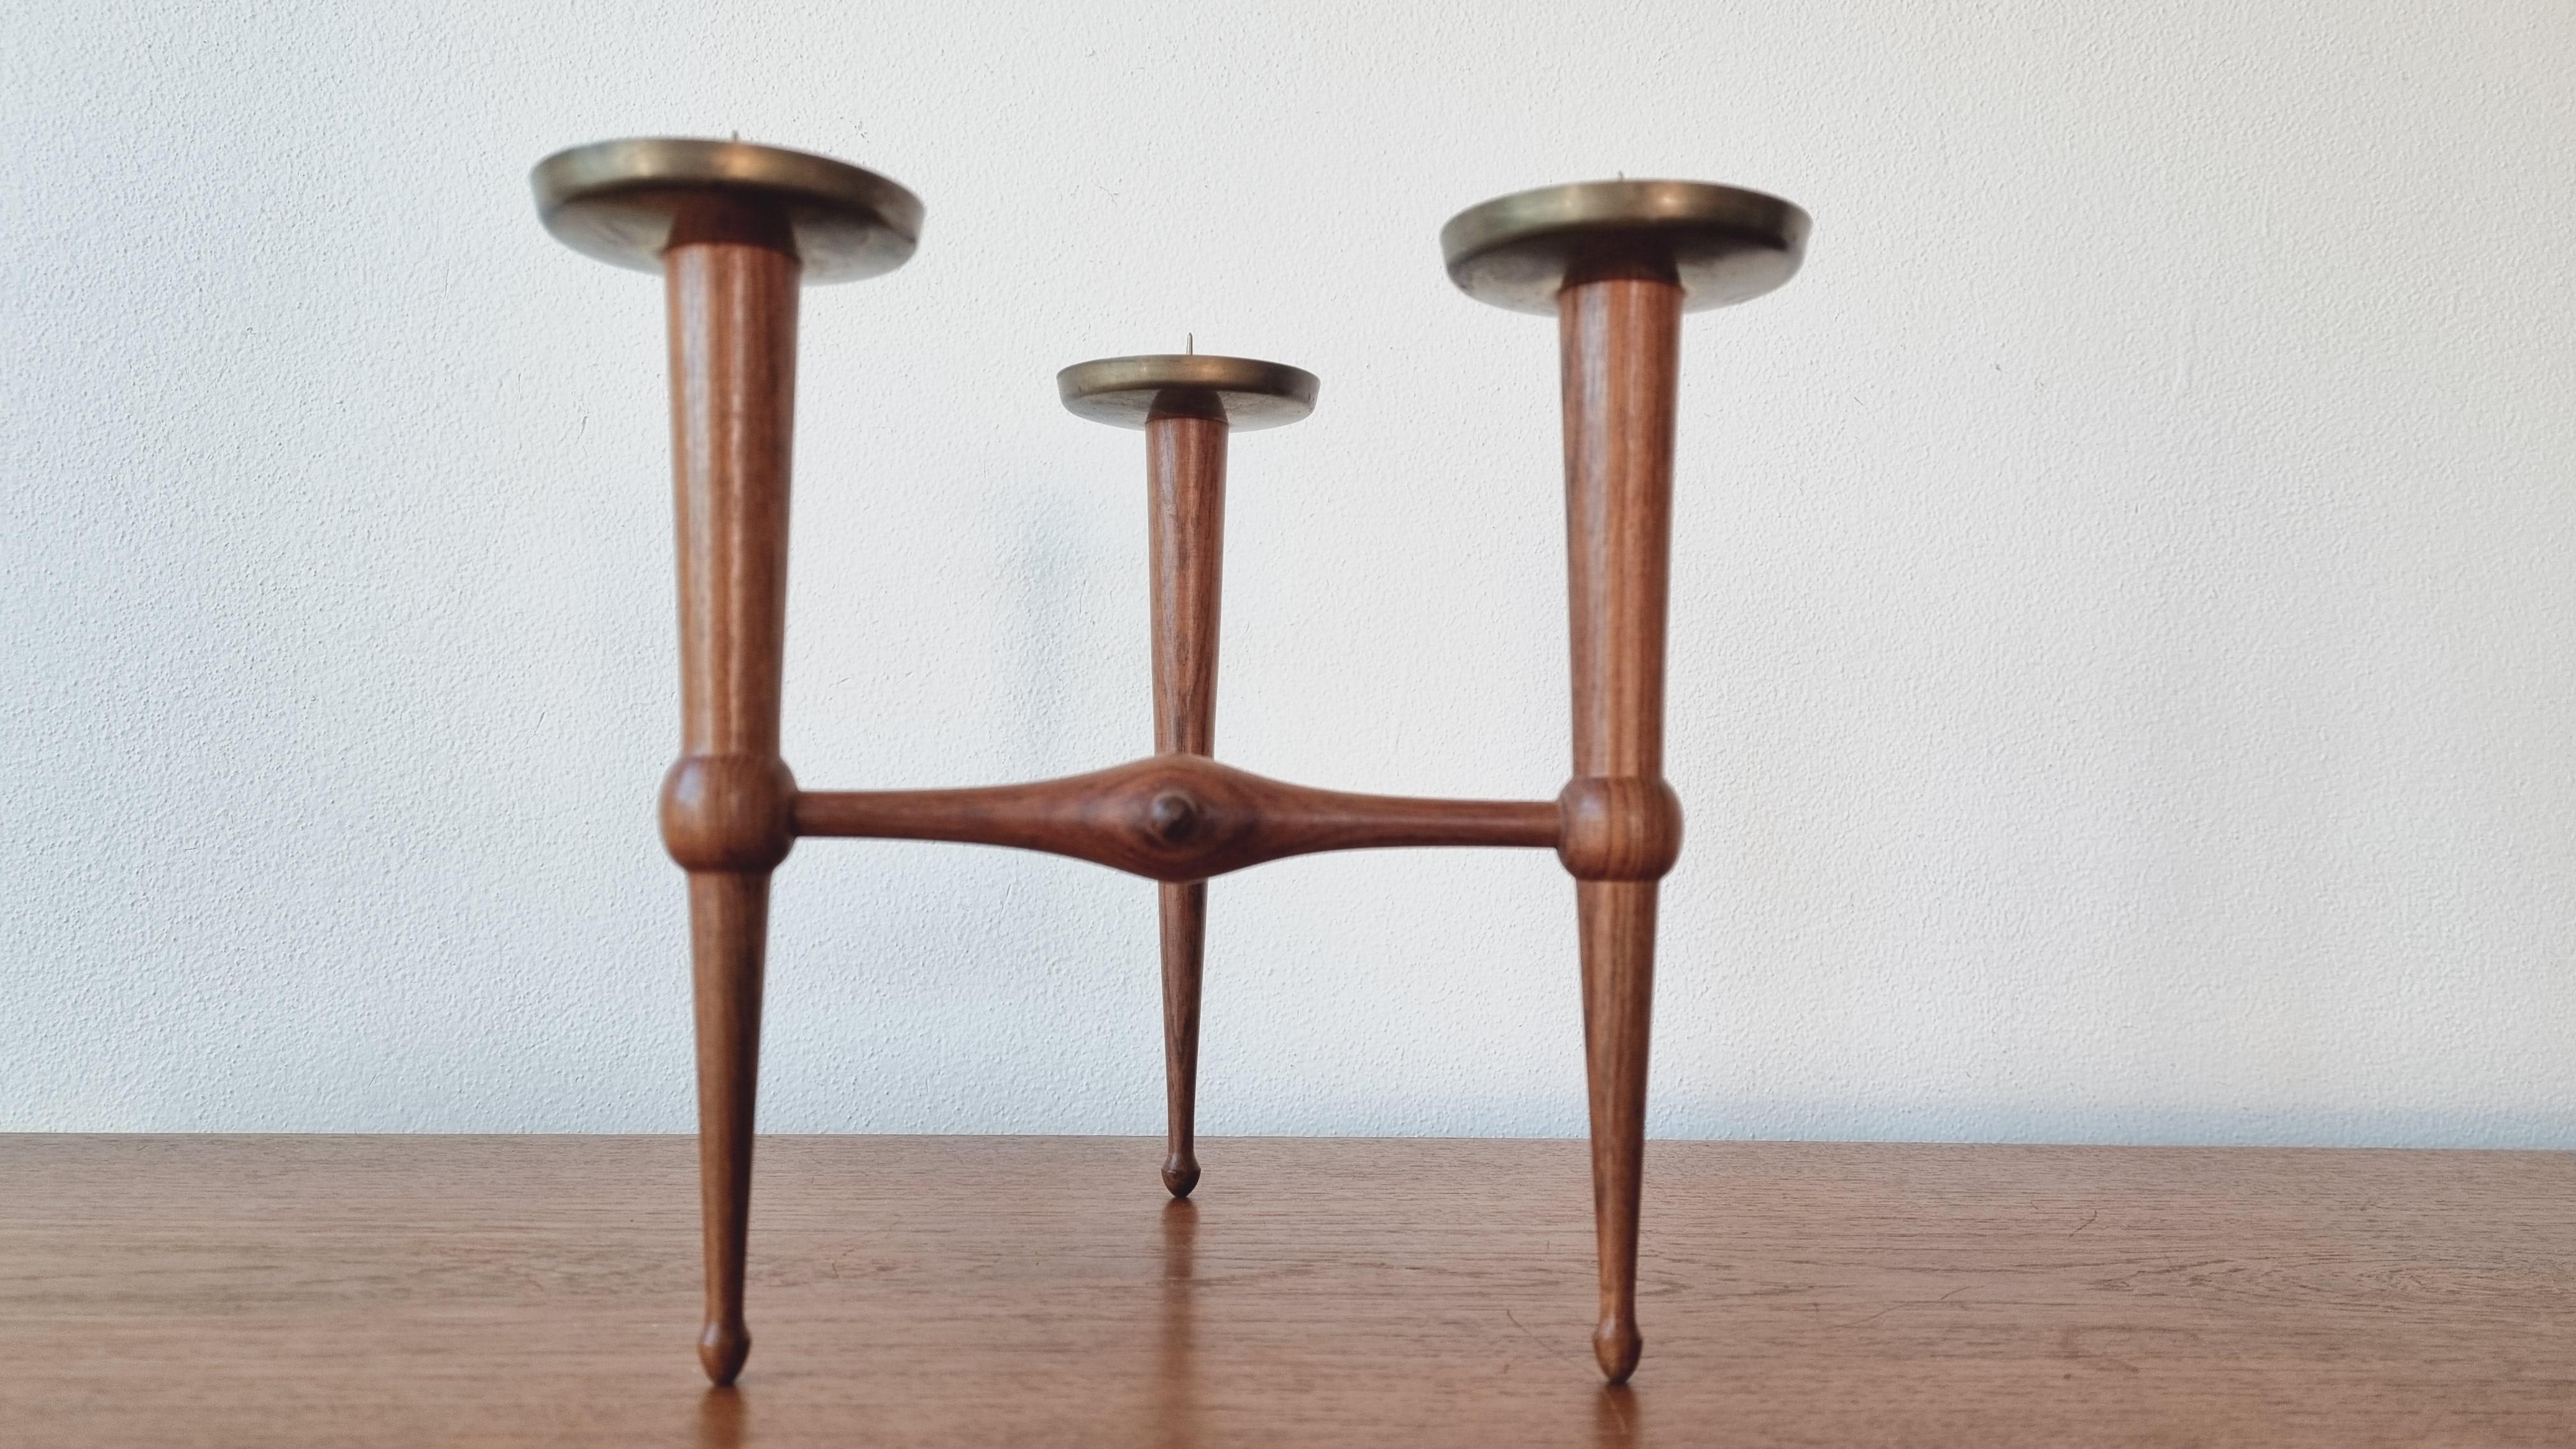 Mid-Century Modern Midcentury Teak and Brass Rare Table Candle Holder / Stick, Denmark, 1960s For Sale